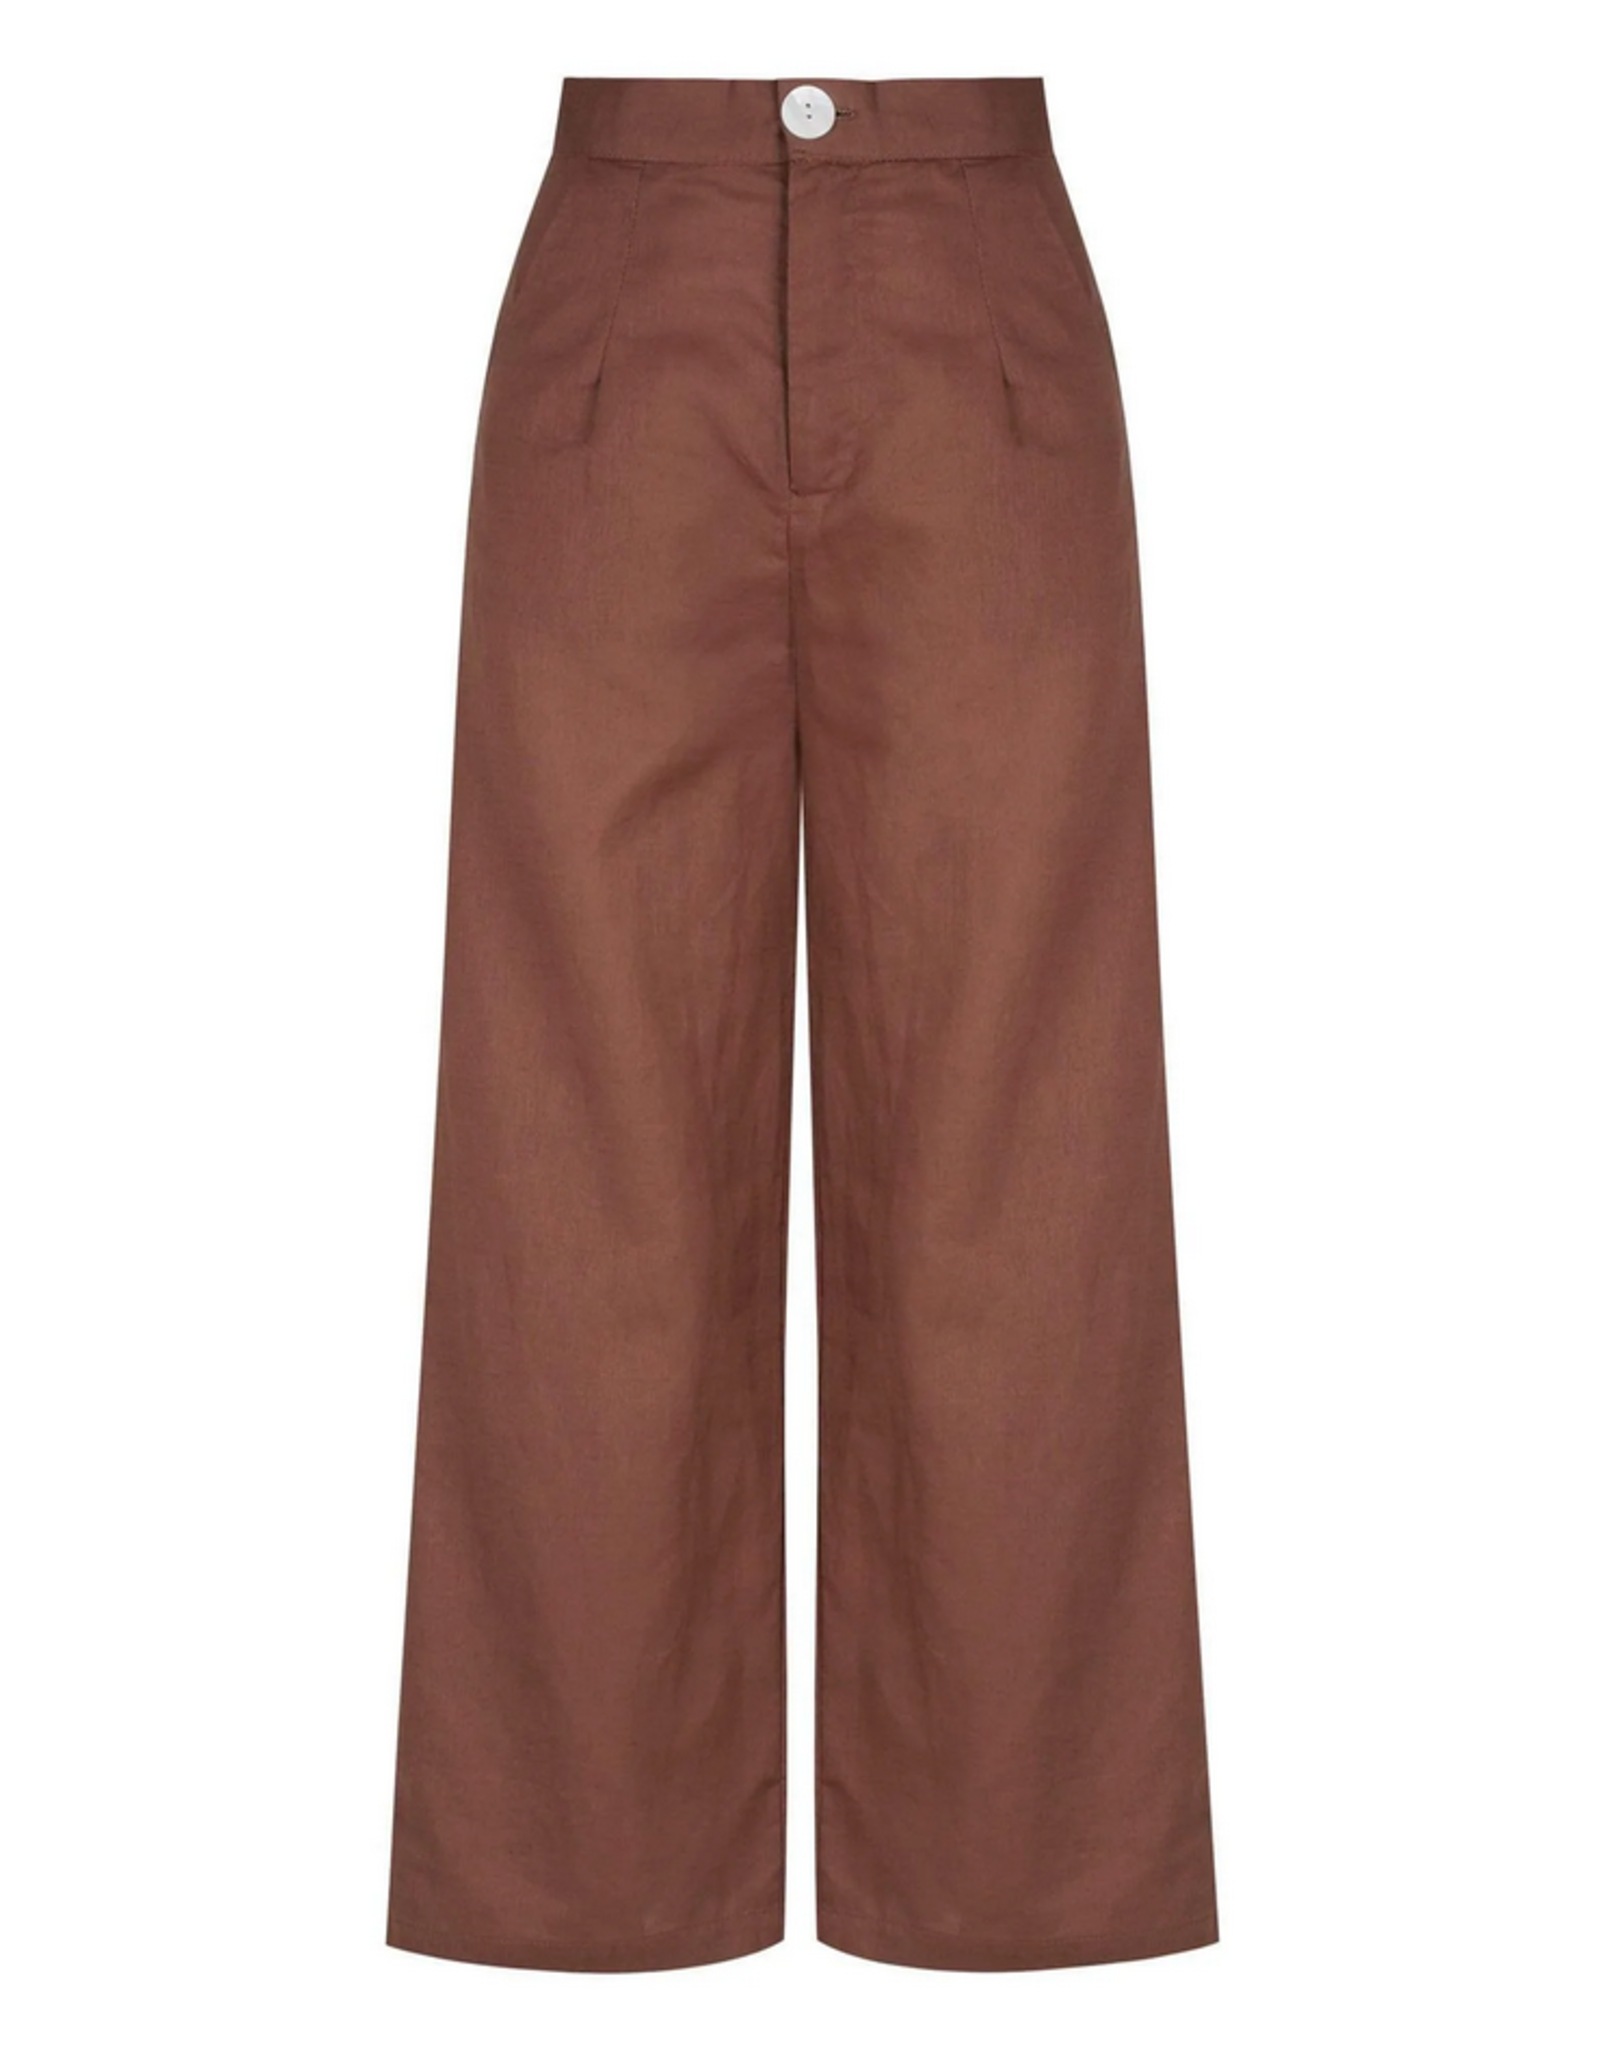 Charlie Holiday Lily Pant in Chocolate